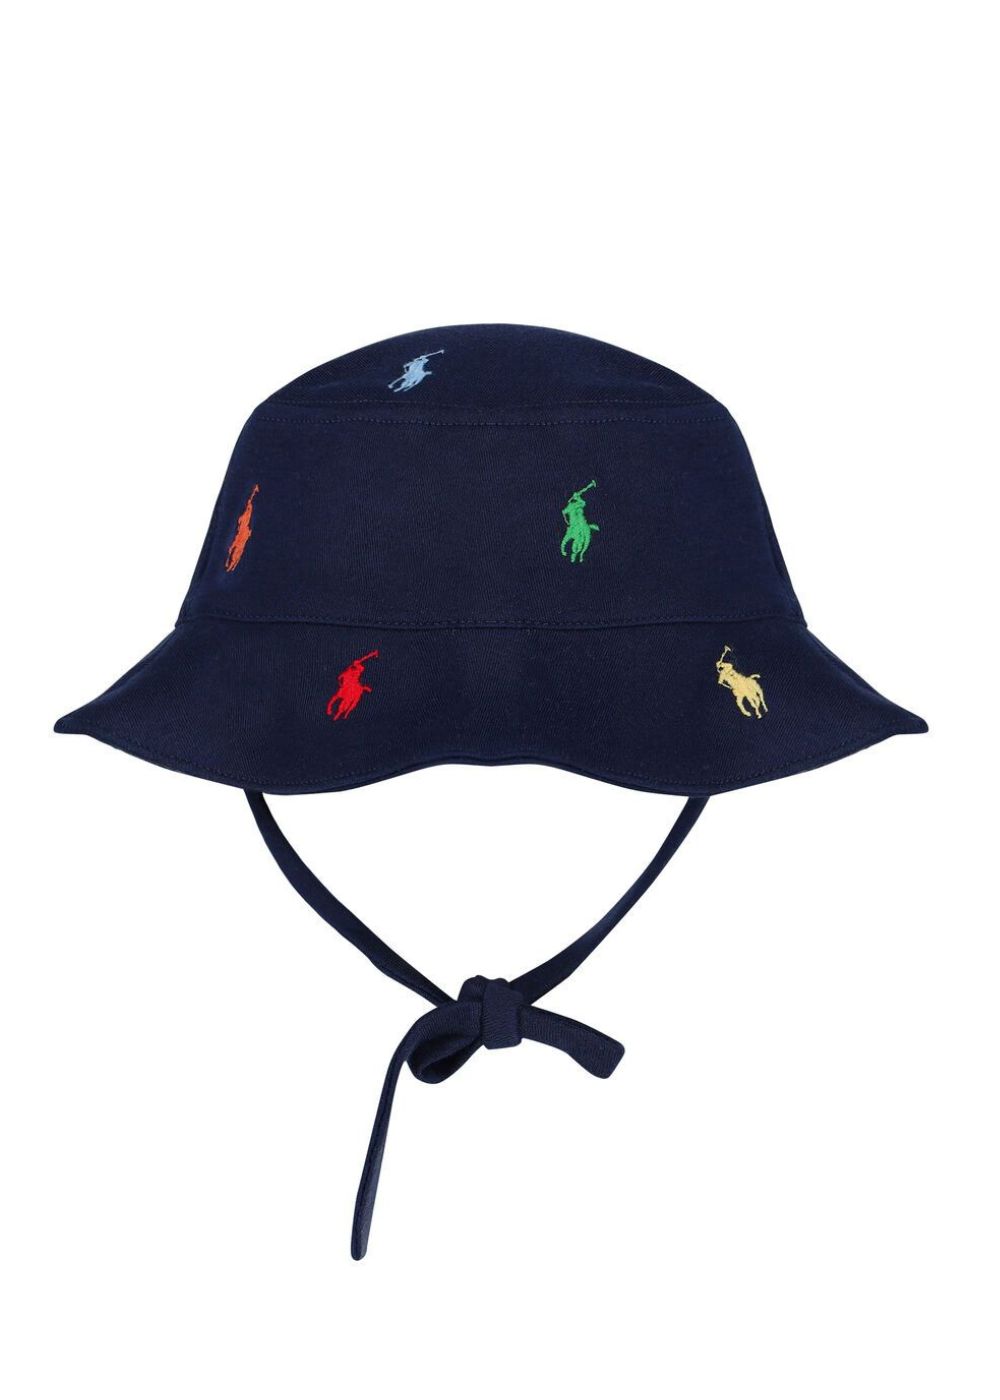 Featured image for “Polo Ralph Lauren Cappellino Pony Polo”